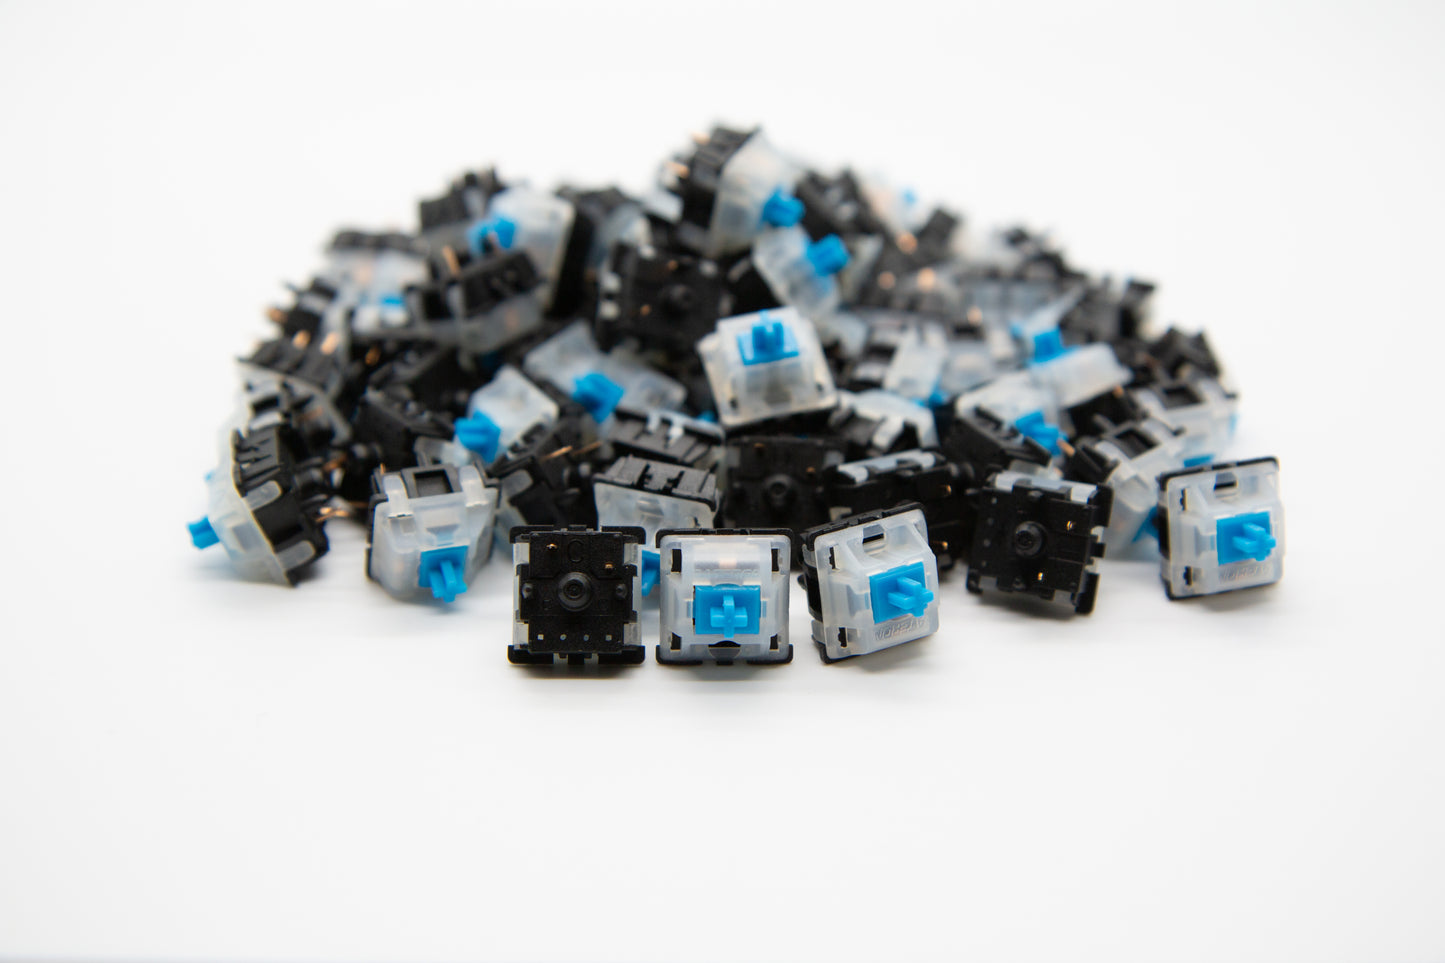 Close-up shot of a pile of Gateron Blue mechanical keyboard switches featuring black and white housing and blue stems